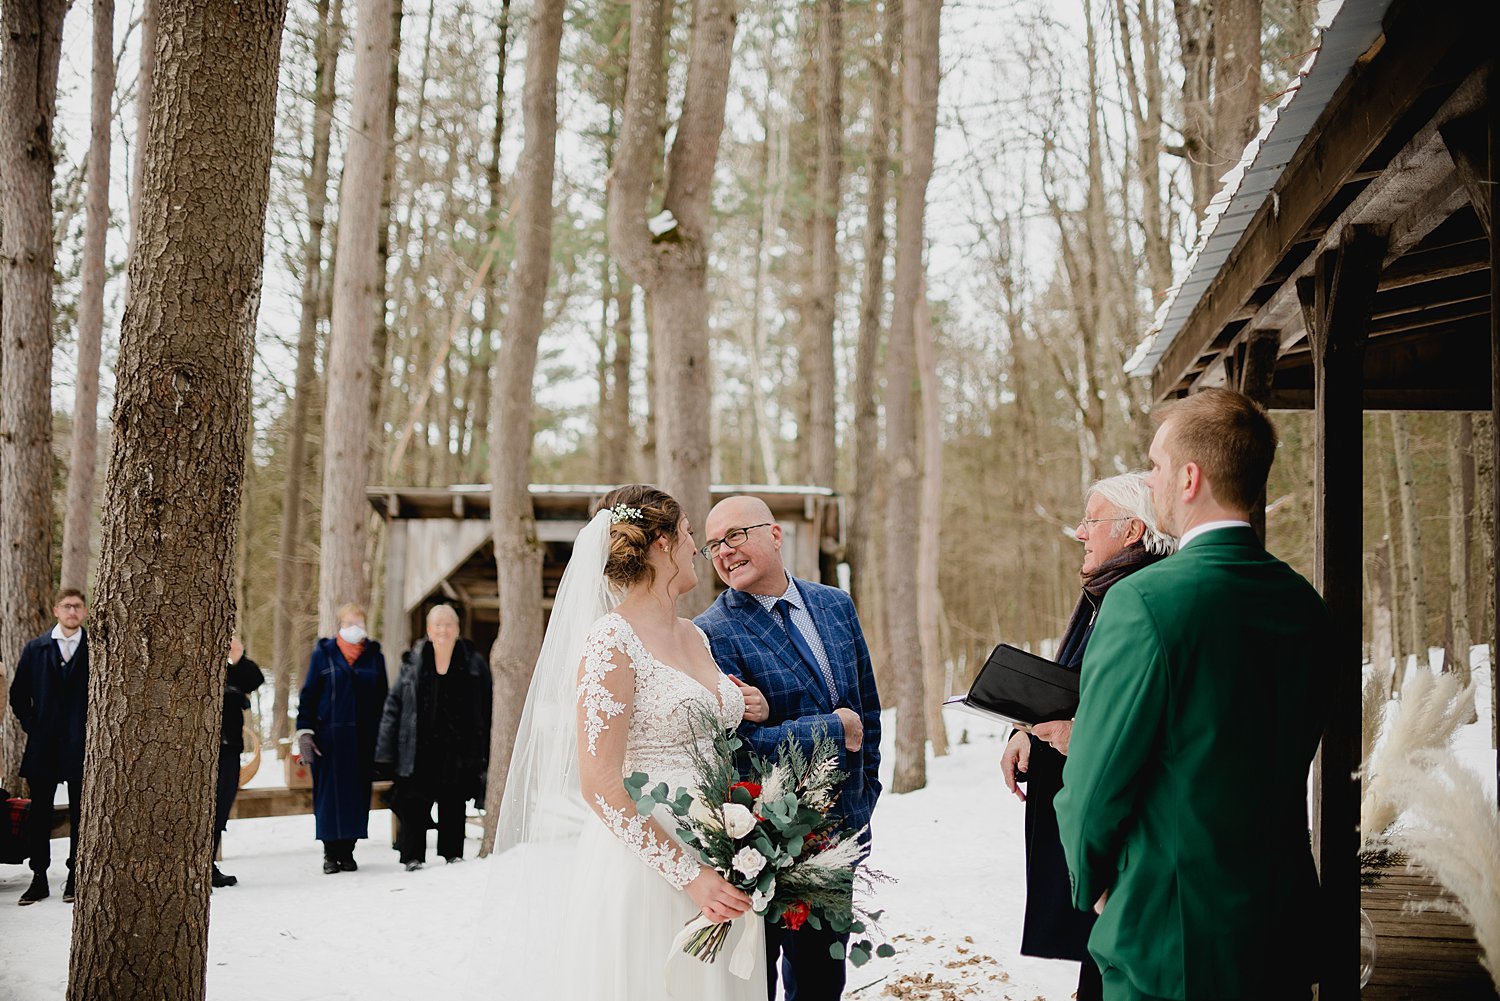 Intimate Winter Elopement at O'Hara Mill Homestead in Madoc, Ontario | Prince Edward County Wedding Photographer | Holly McMurter Photographs_0011.jpg